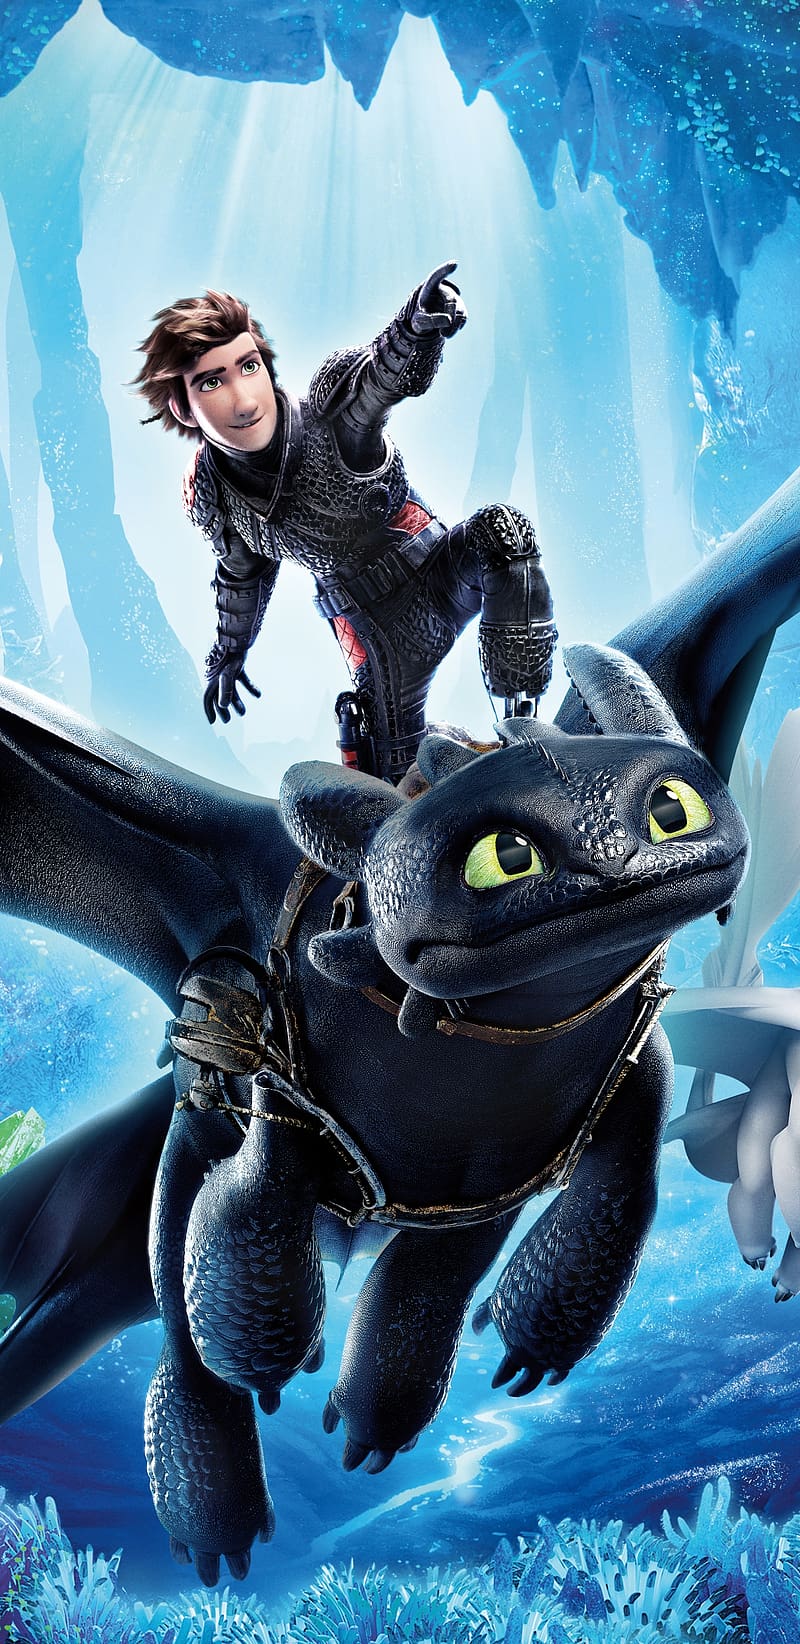 HD wallpaper How to train your dragon Hiccup and Toothless in the night  how to train your dragon poster  Wallpaper Flare